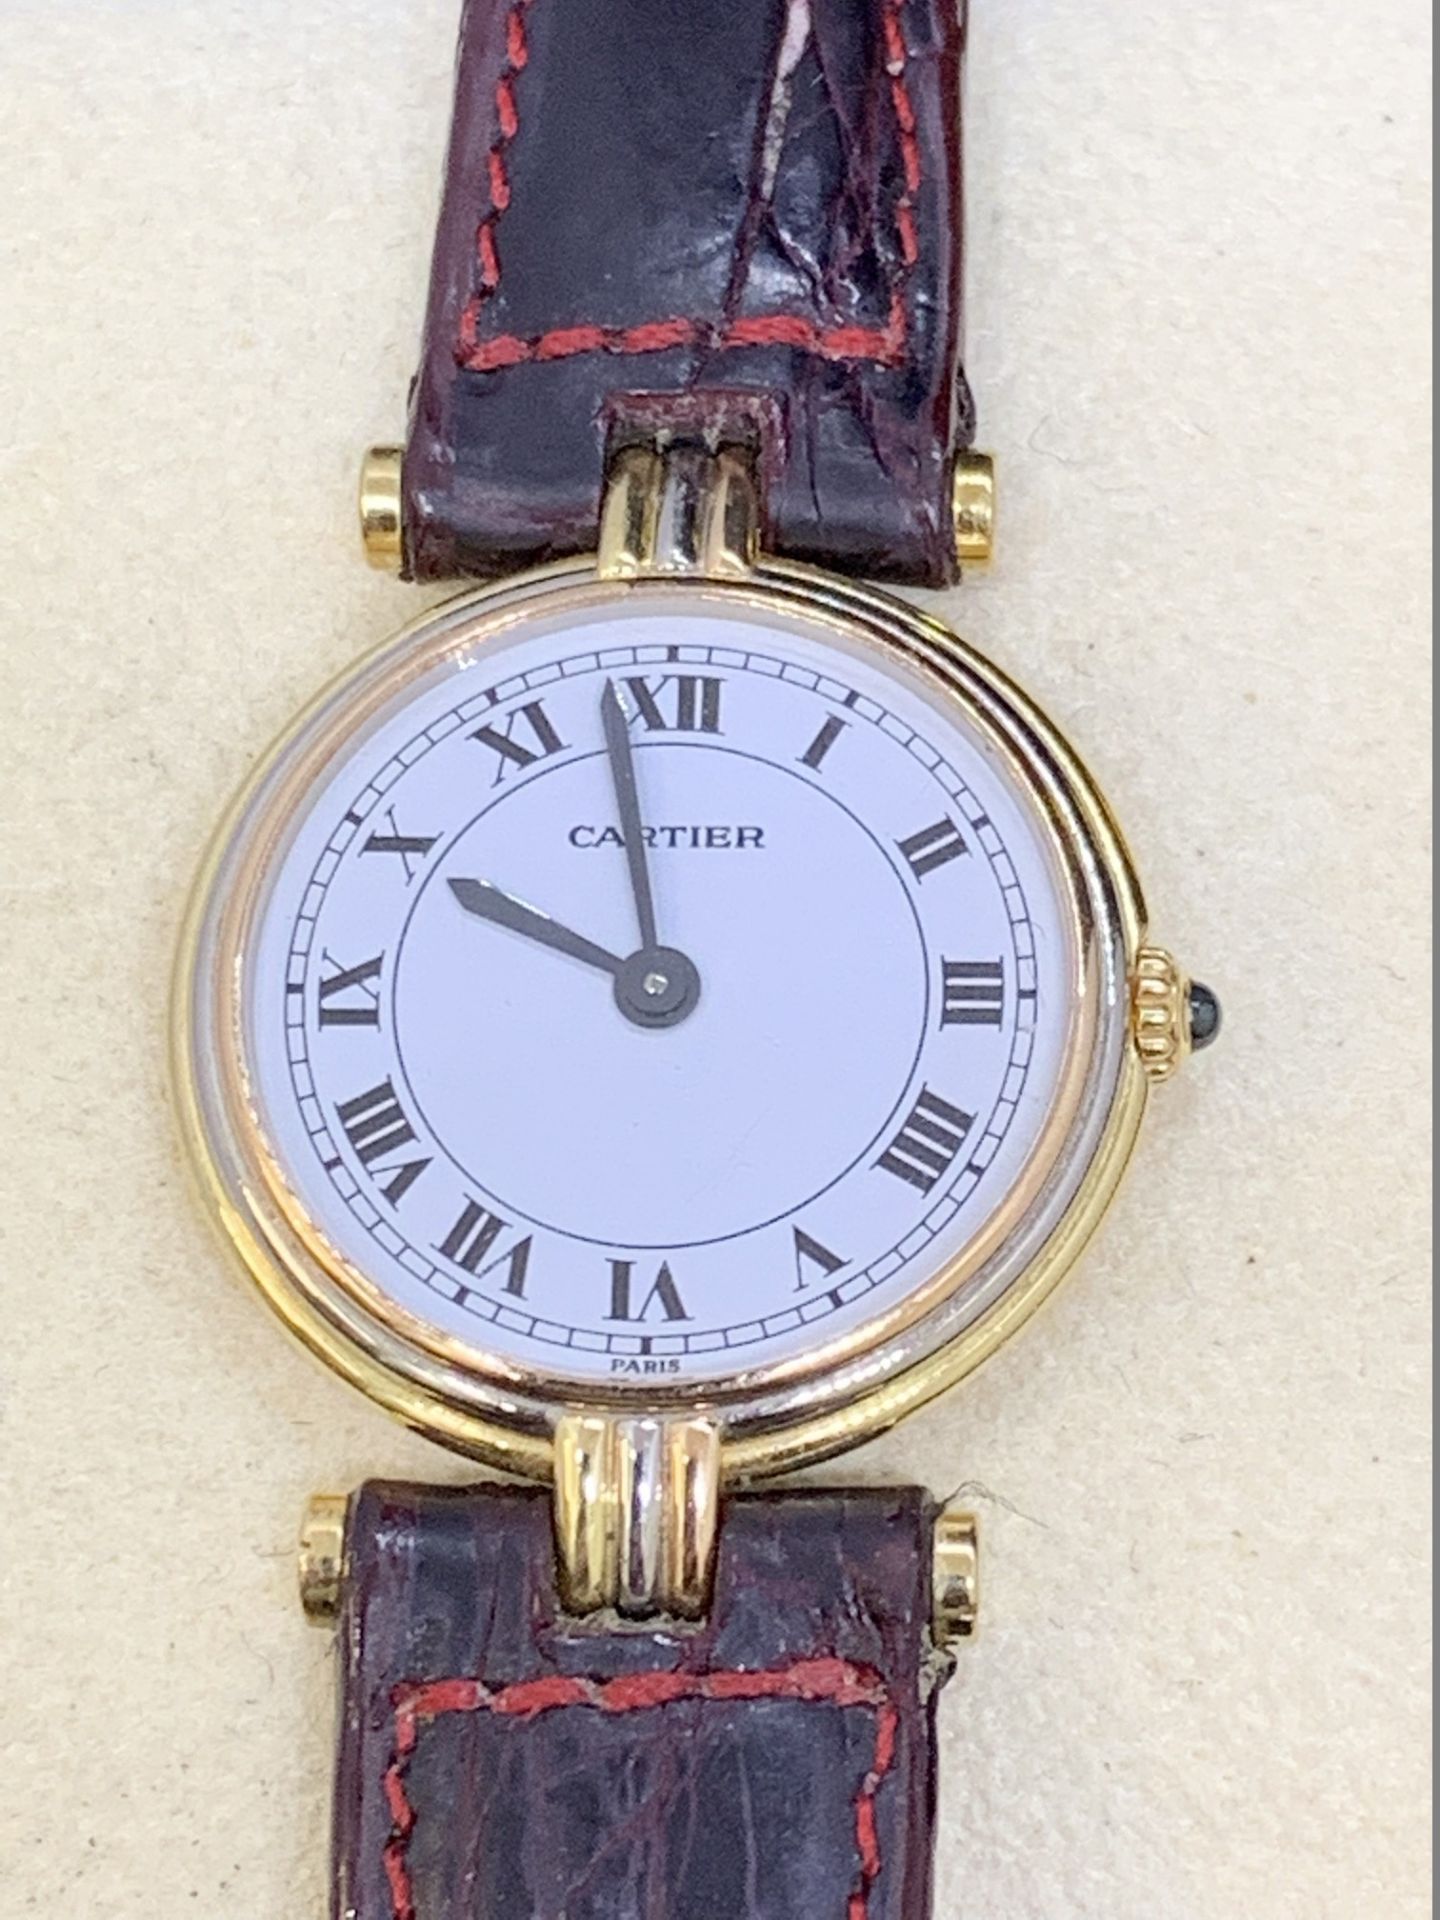 CARTIER 18ct GOLD WATCH ON LEATHER STRAP